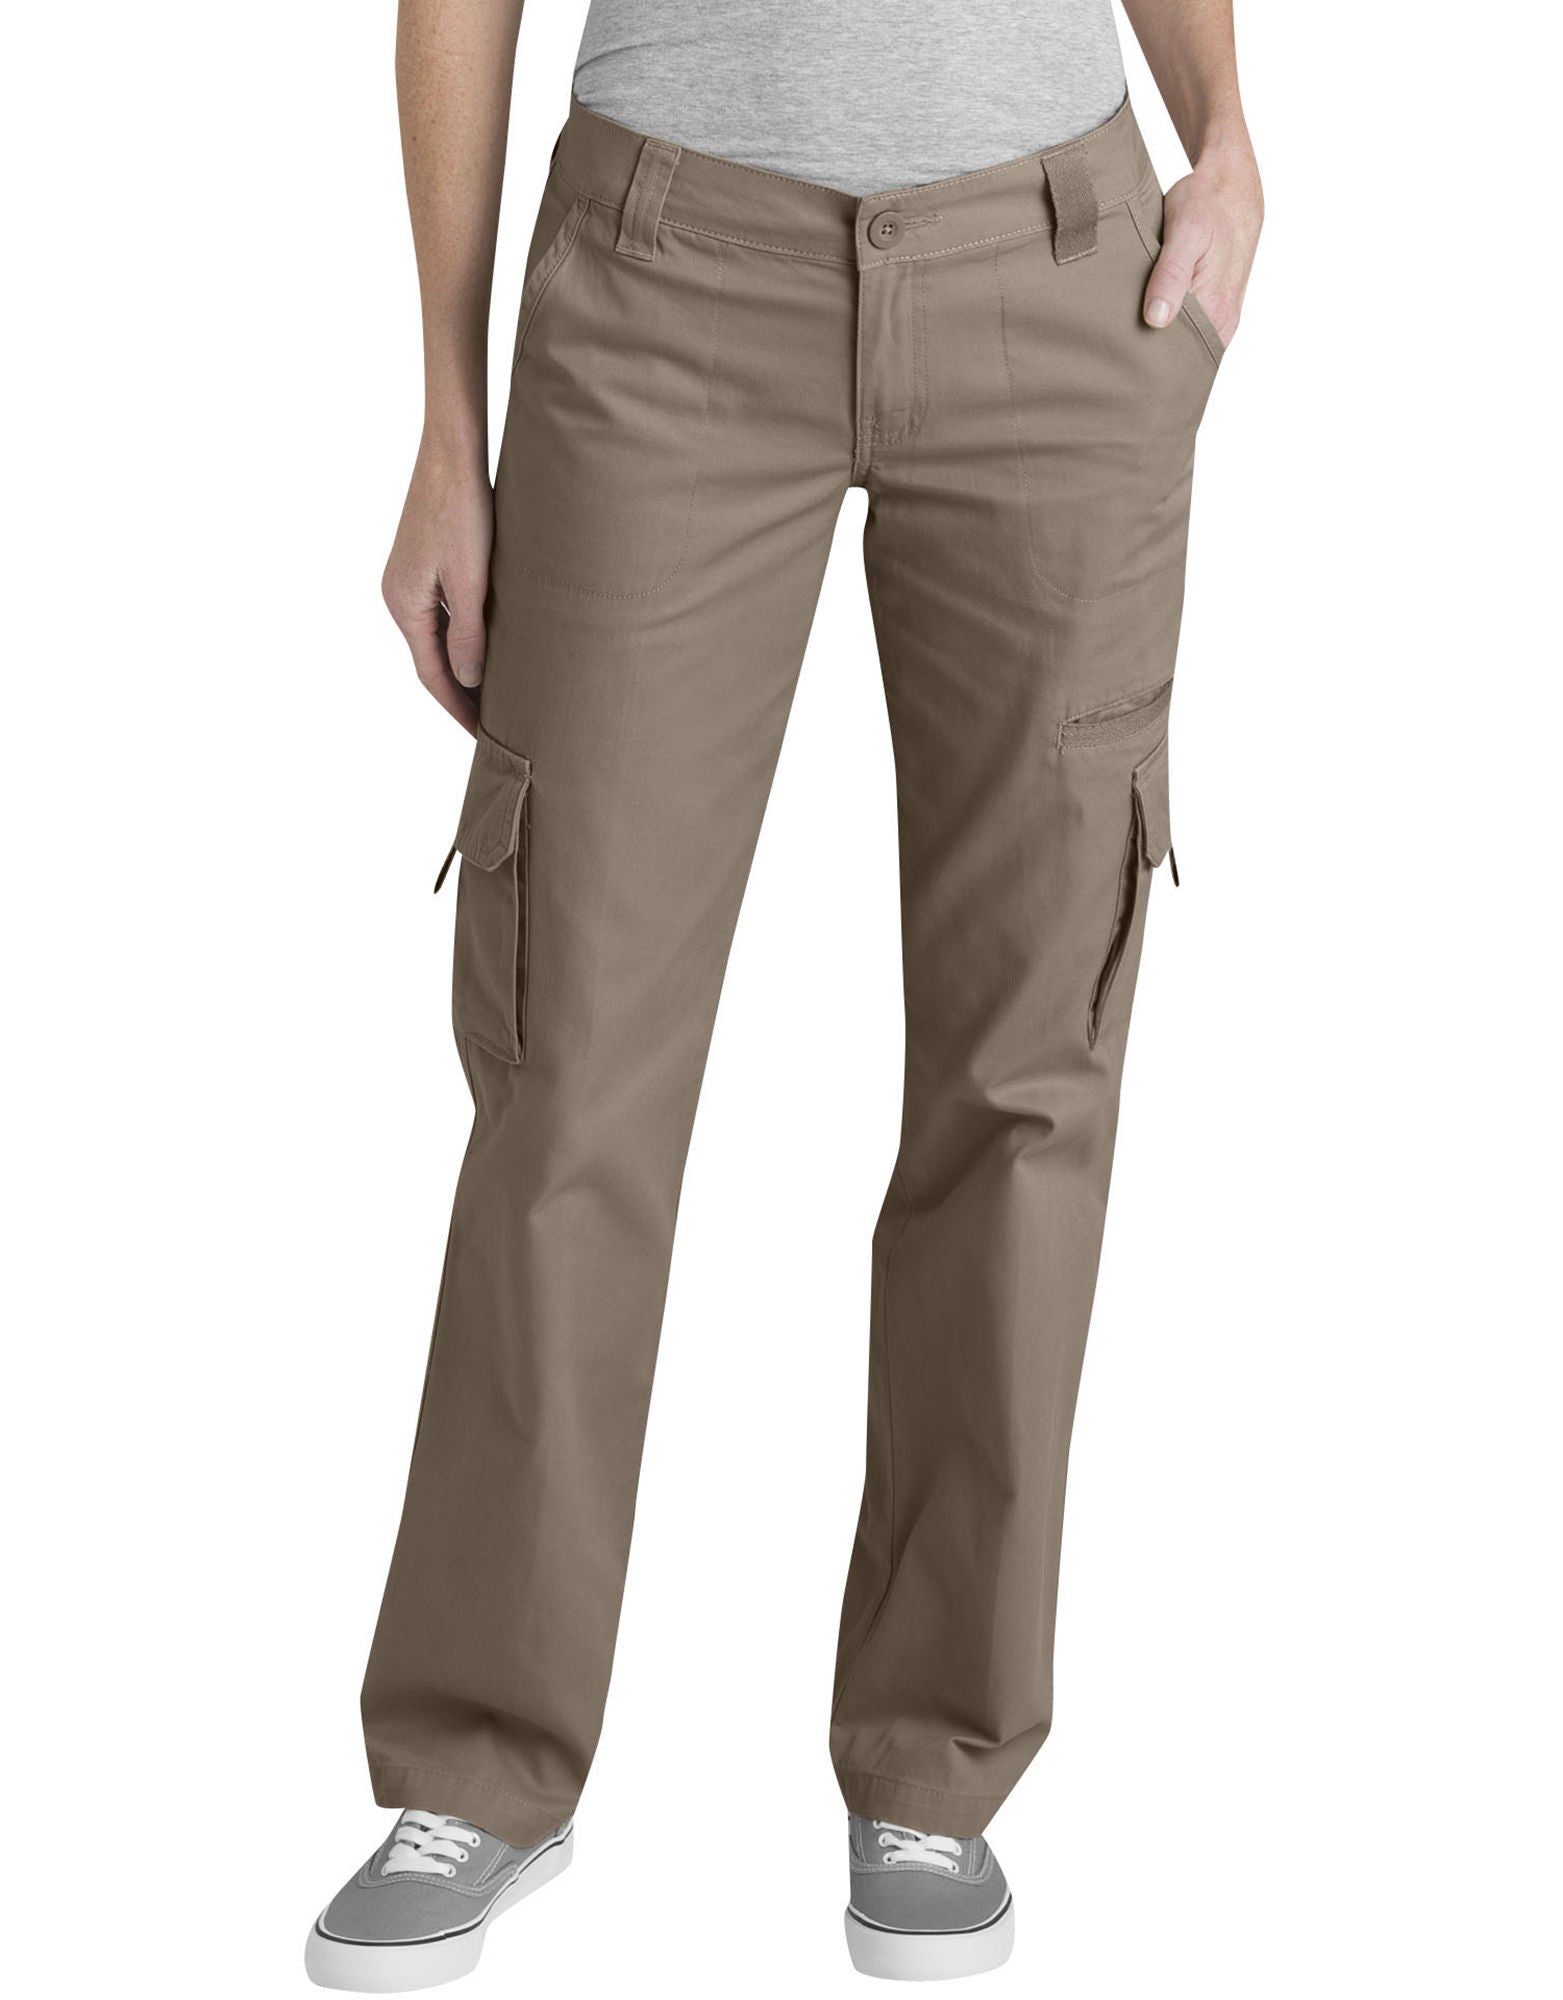 DIC-FP777 - Dickies Womens Relaxed Cargo Pants